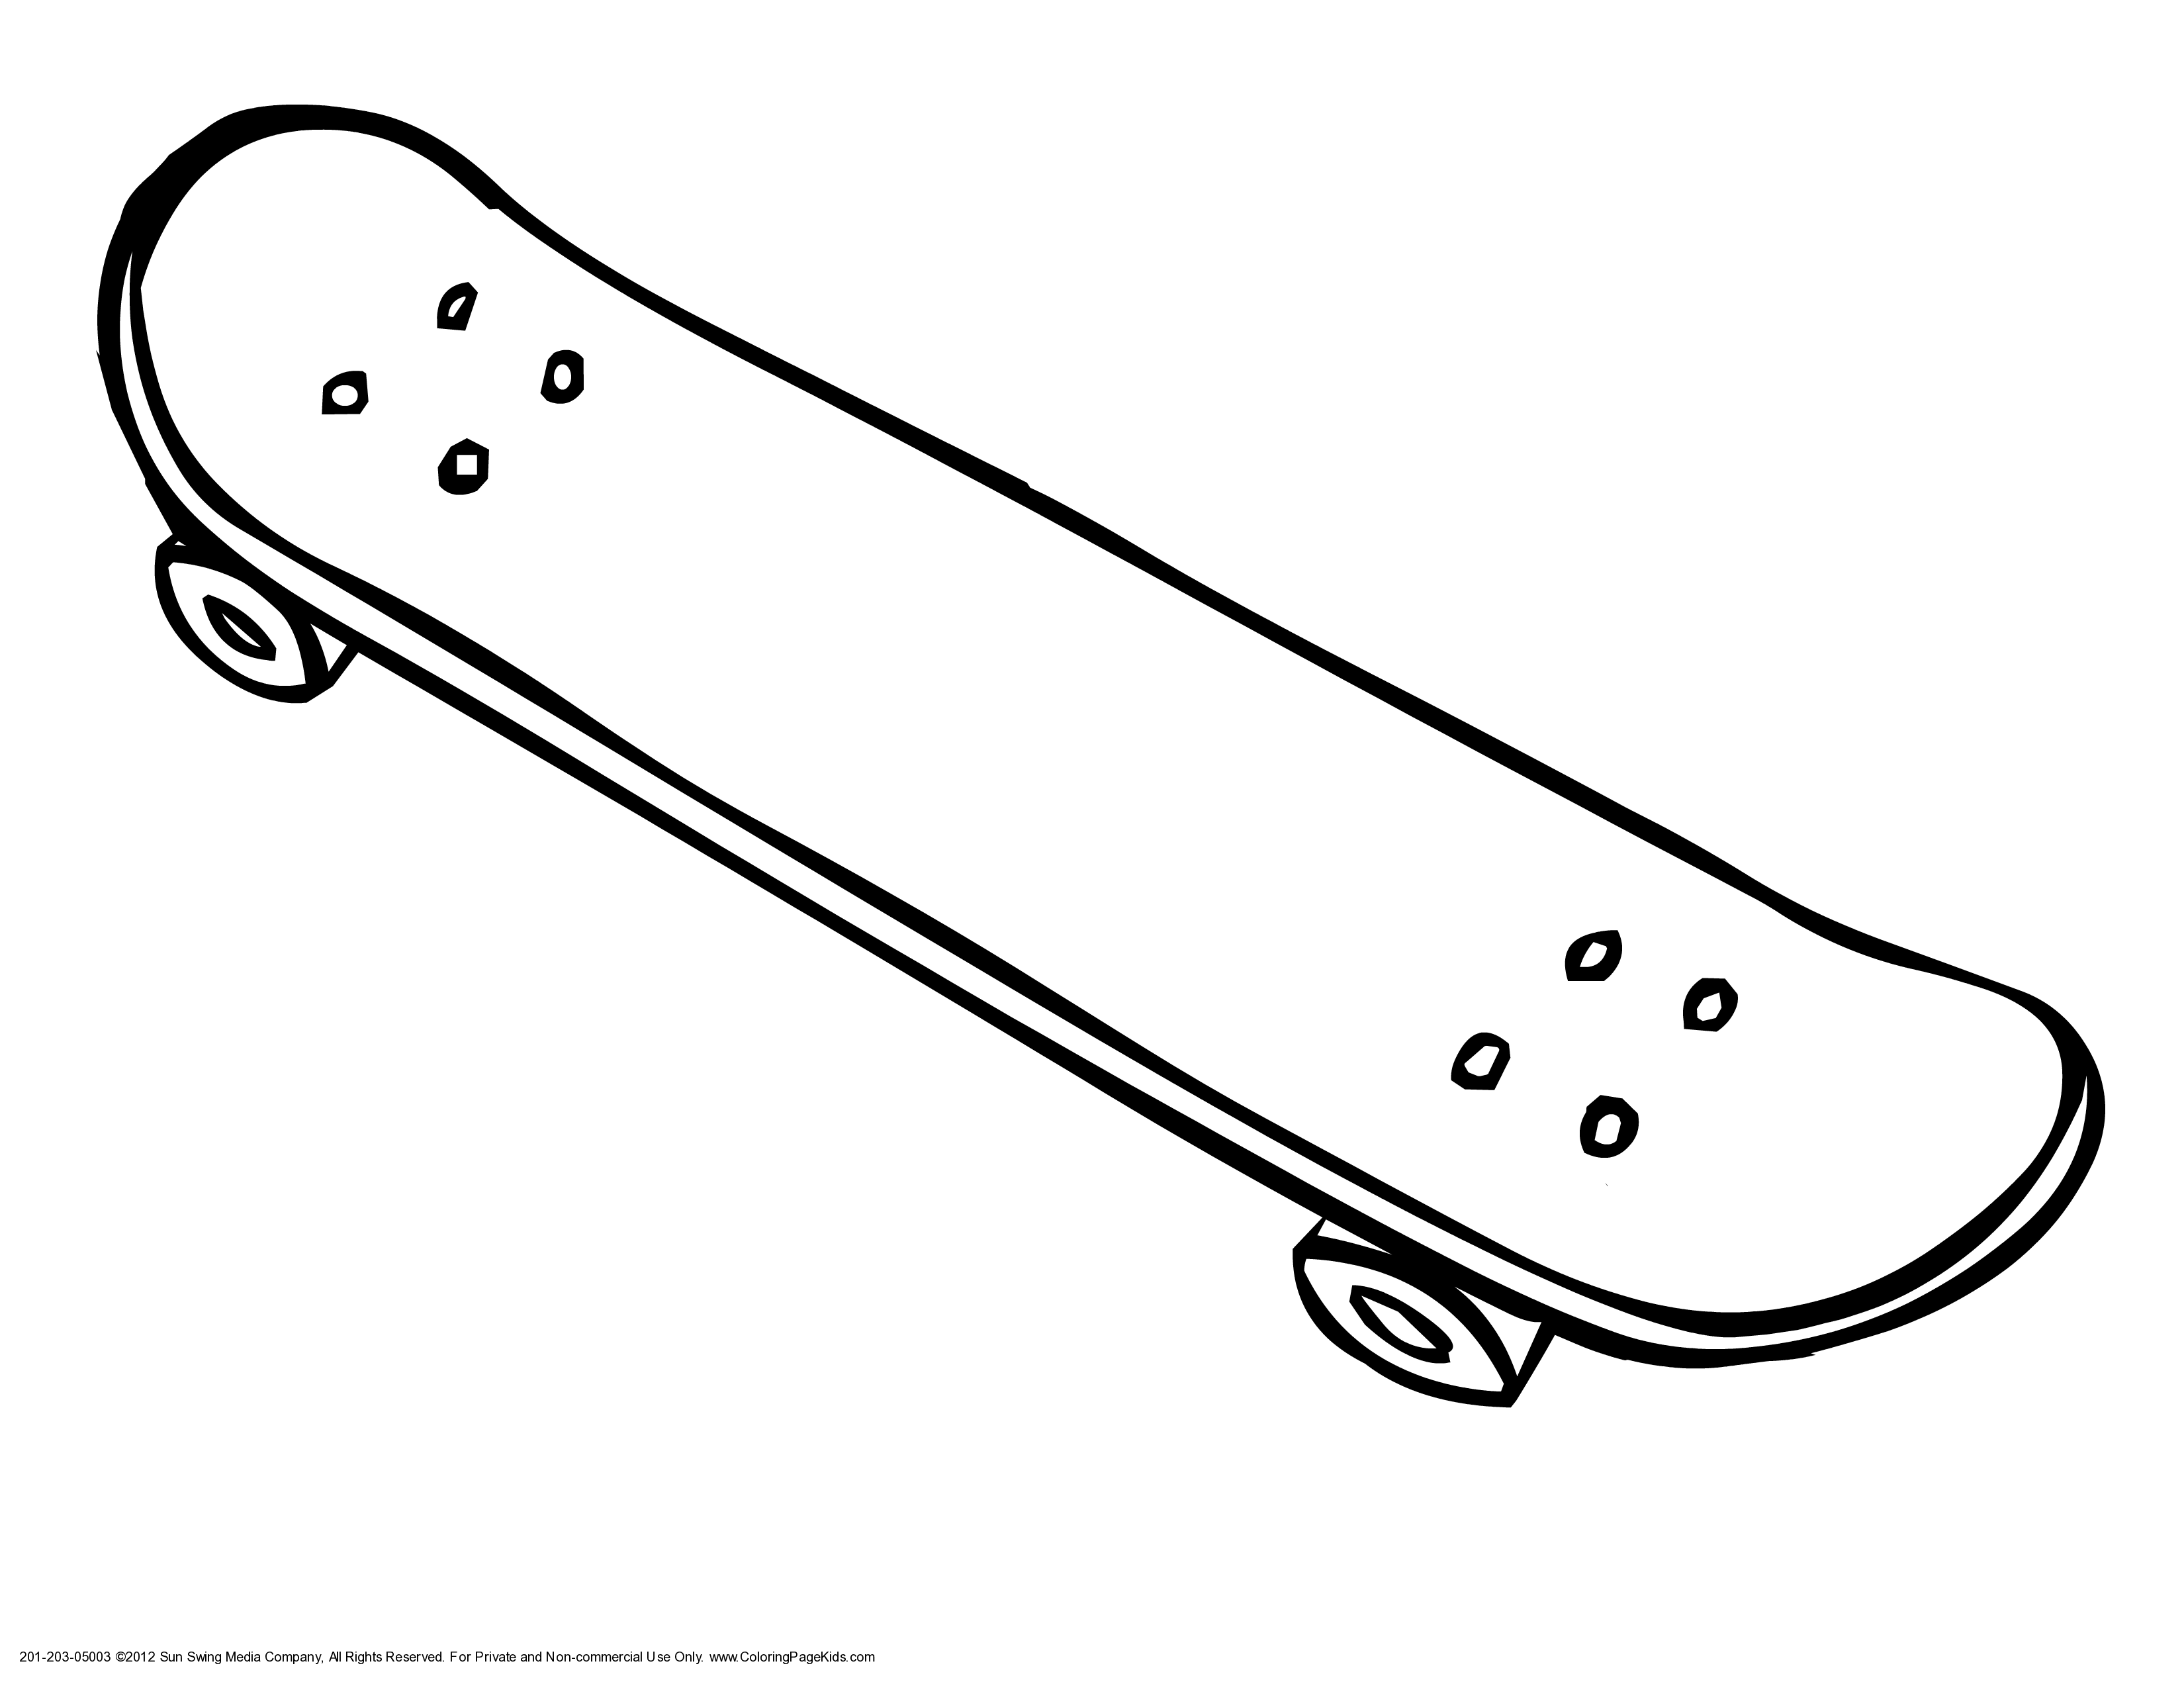 Kateboard clipart #4, Download drawings